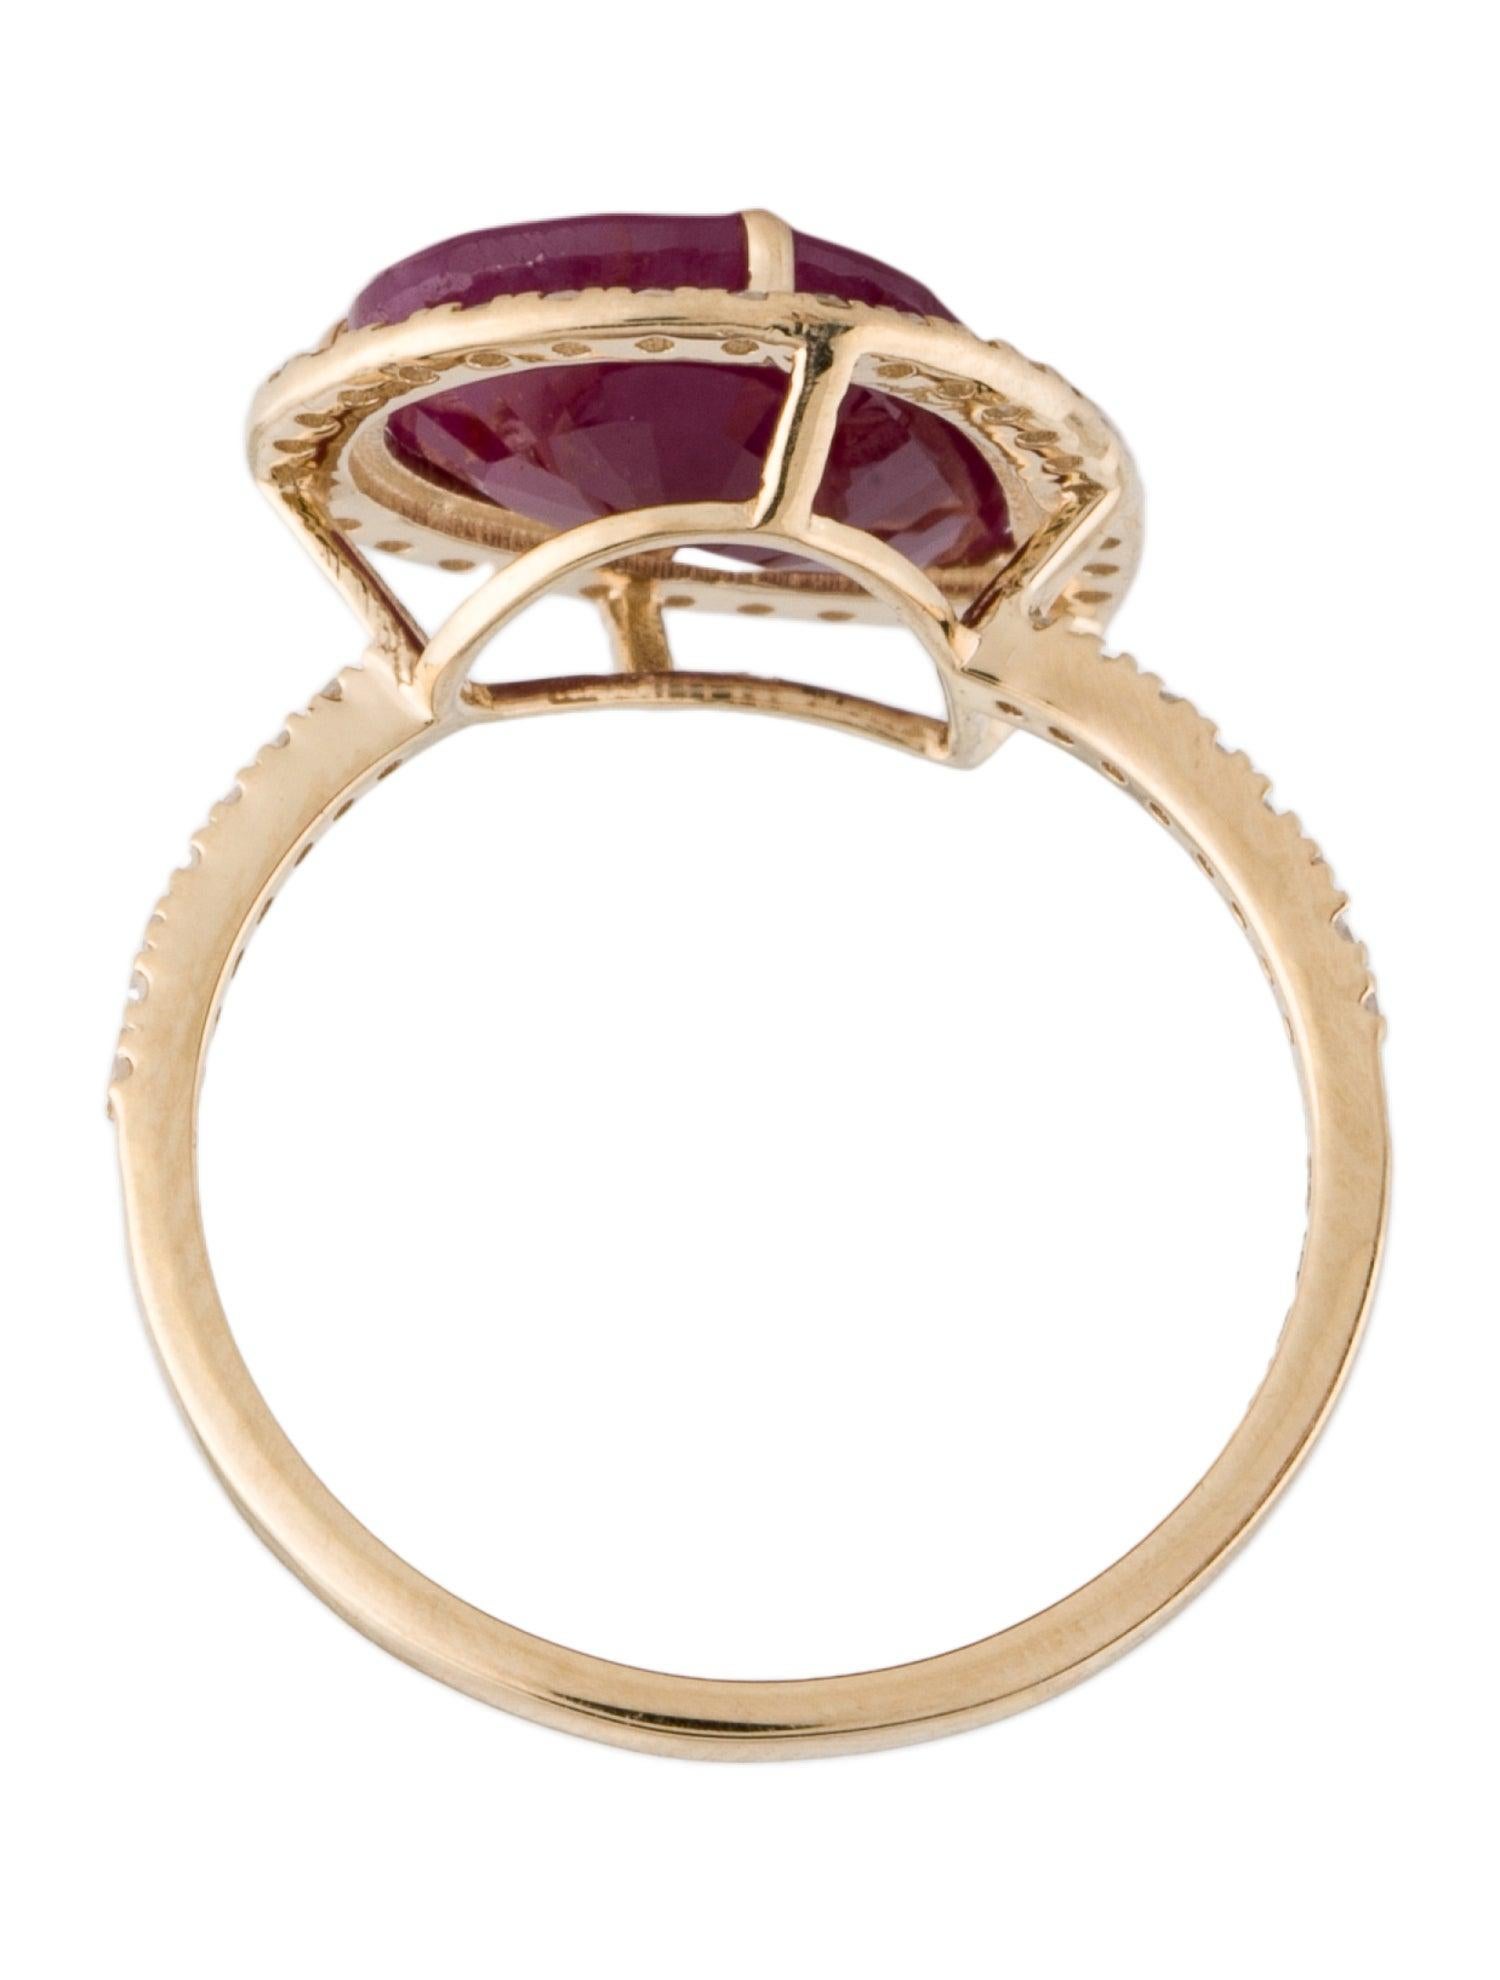 Brilliant Cut Luxurious 14K Ruby & Diamond Cocktail Ring 5.17ctw - Size 8 - Statement Jewelry For Sale